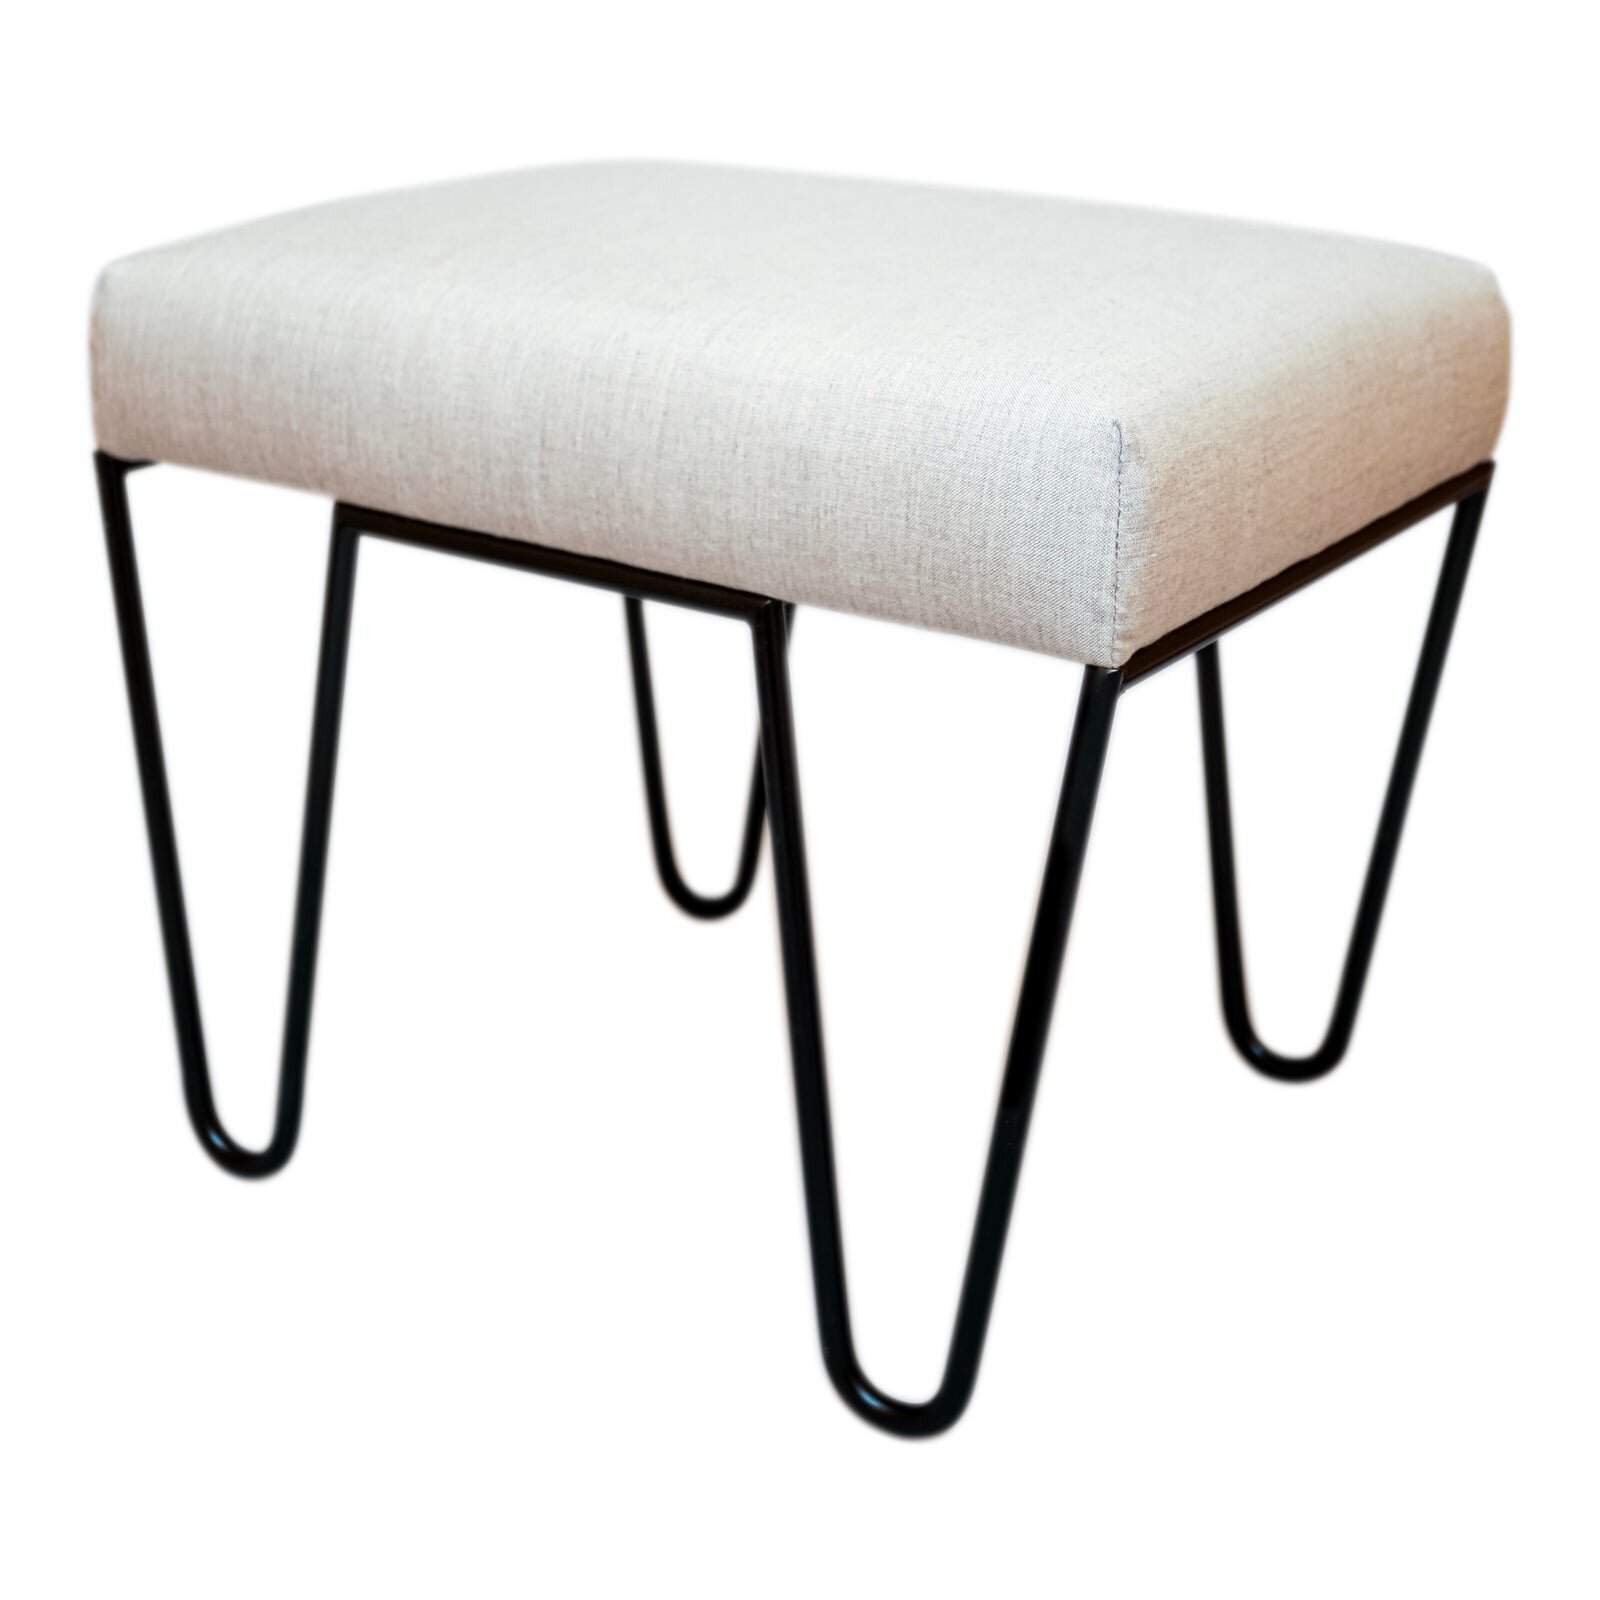 alex-outdoor-ottoman-beige-upholstered-sunbrella-with-black-stainless-steel-powder-coated-base-6249.jpeg